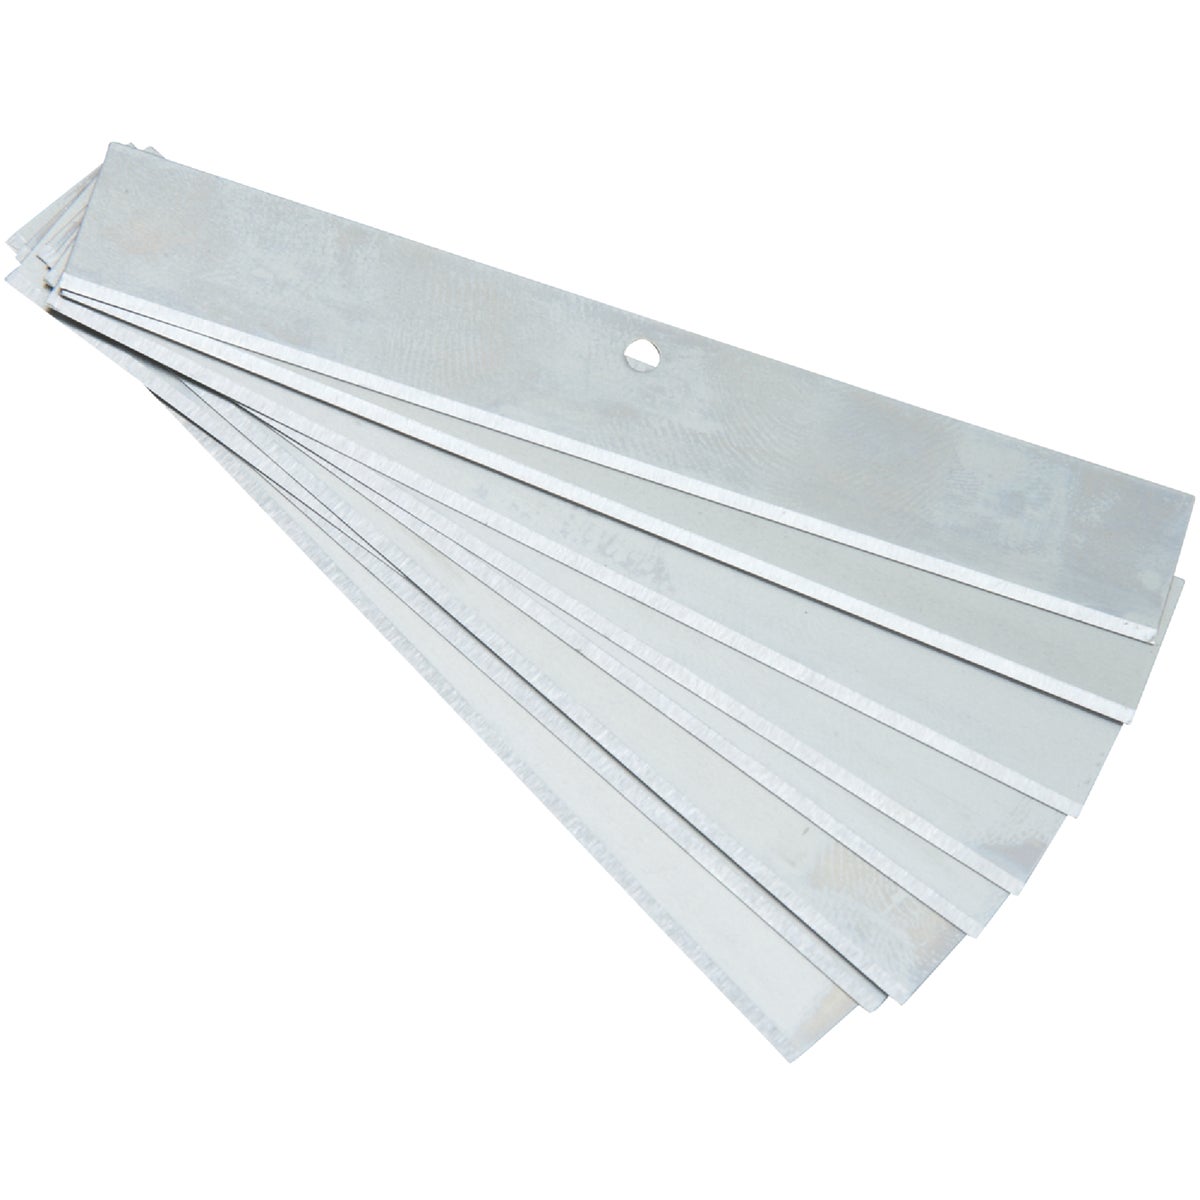 Item 308323, These replacement blades are intended for the Do it 4 In. x 12 In.